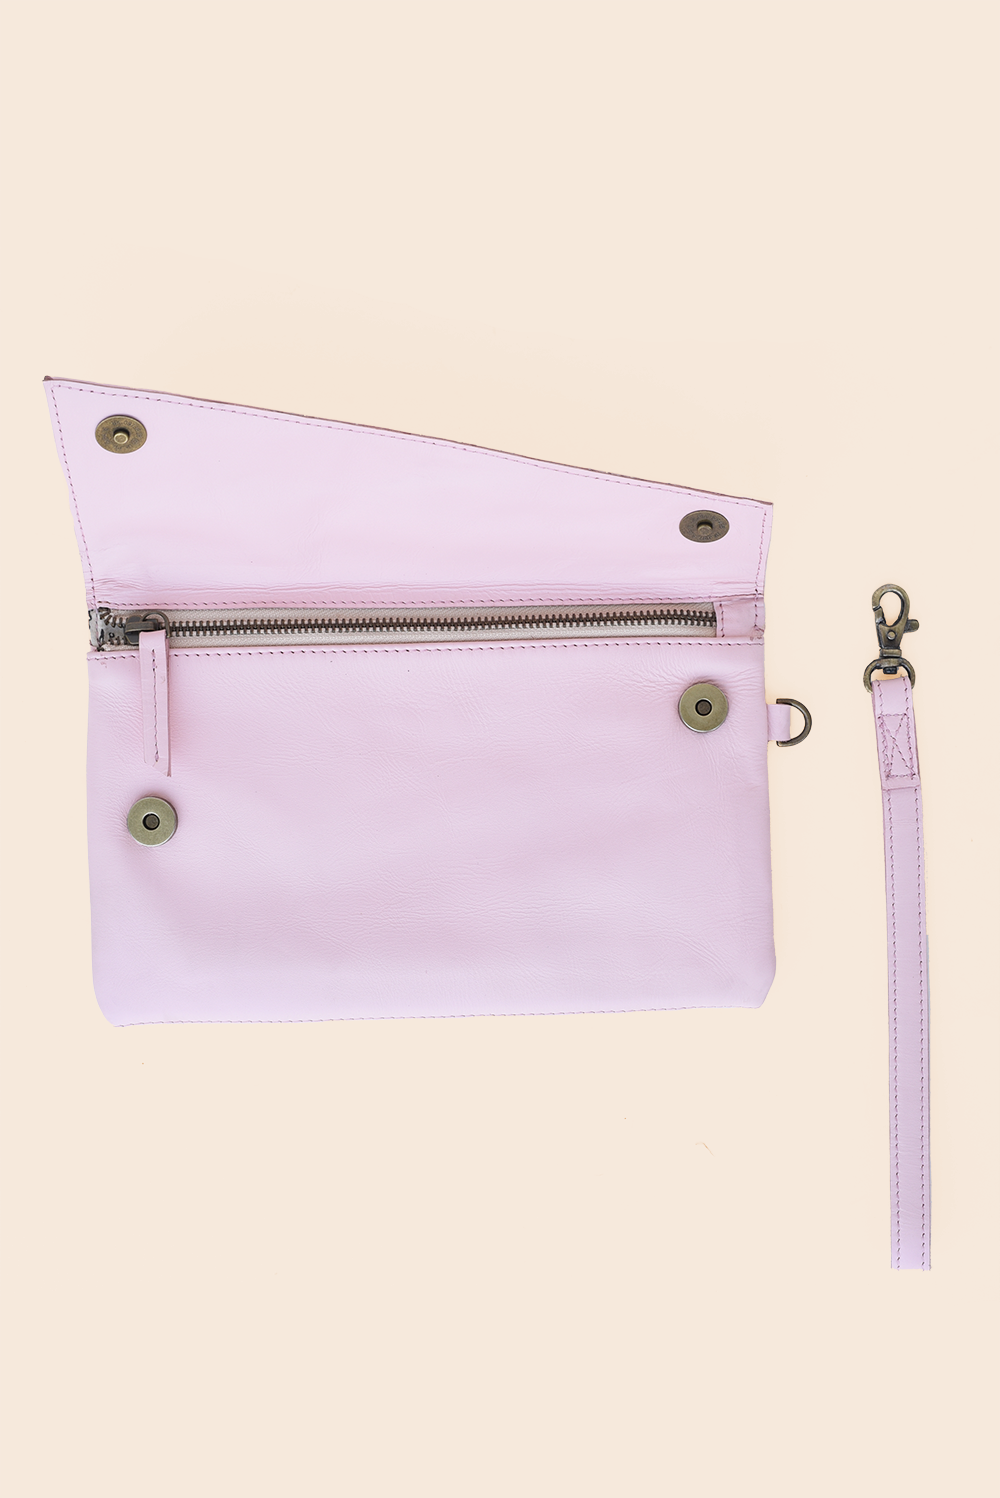 Pink Leather Clutch with zipper closure